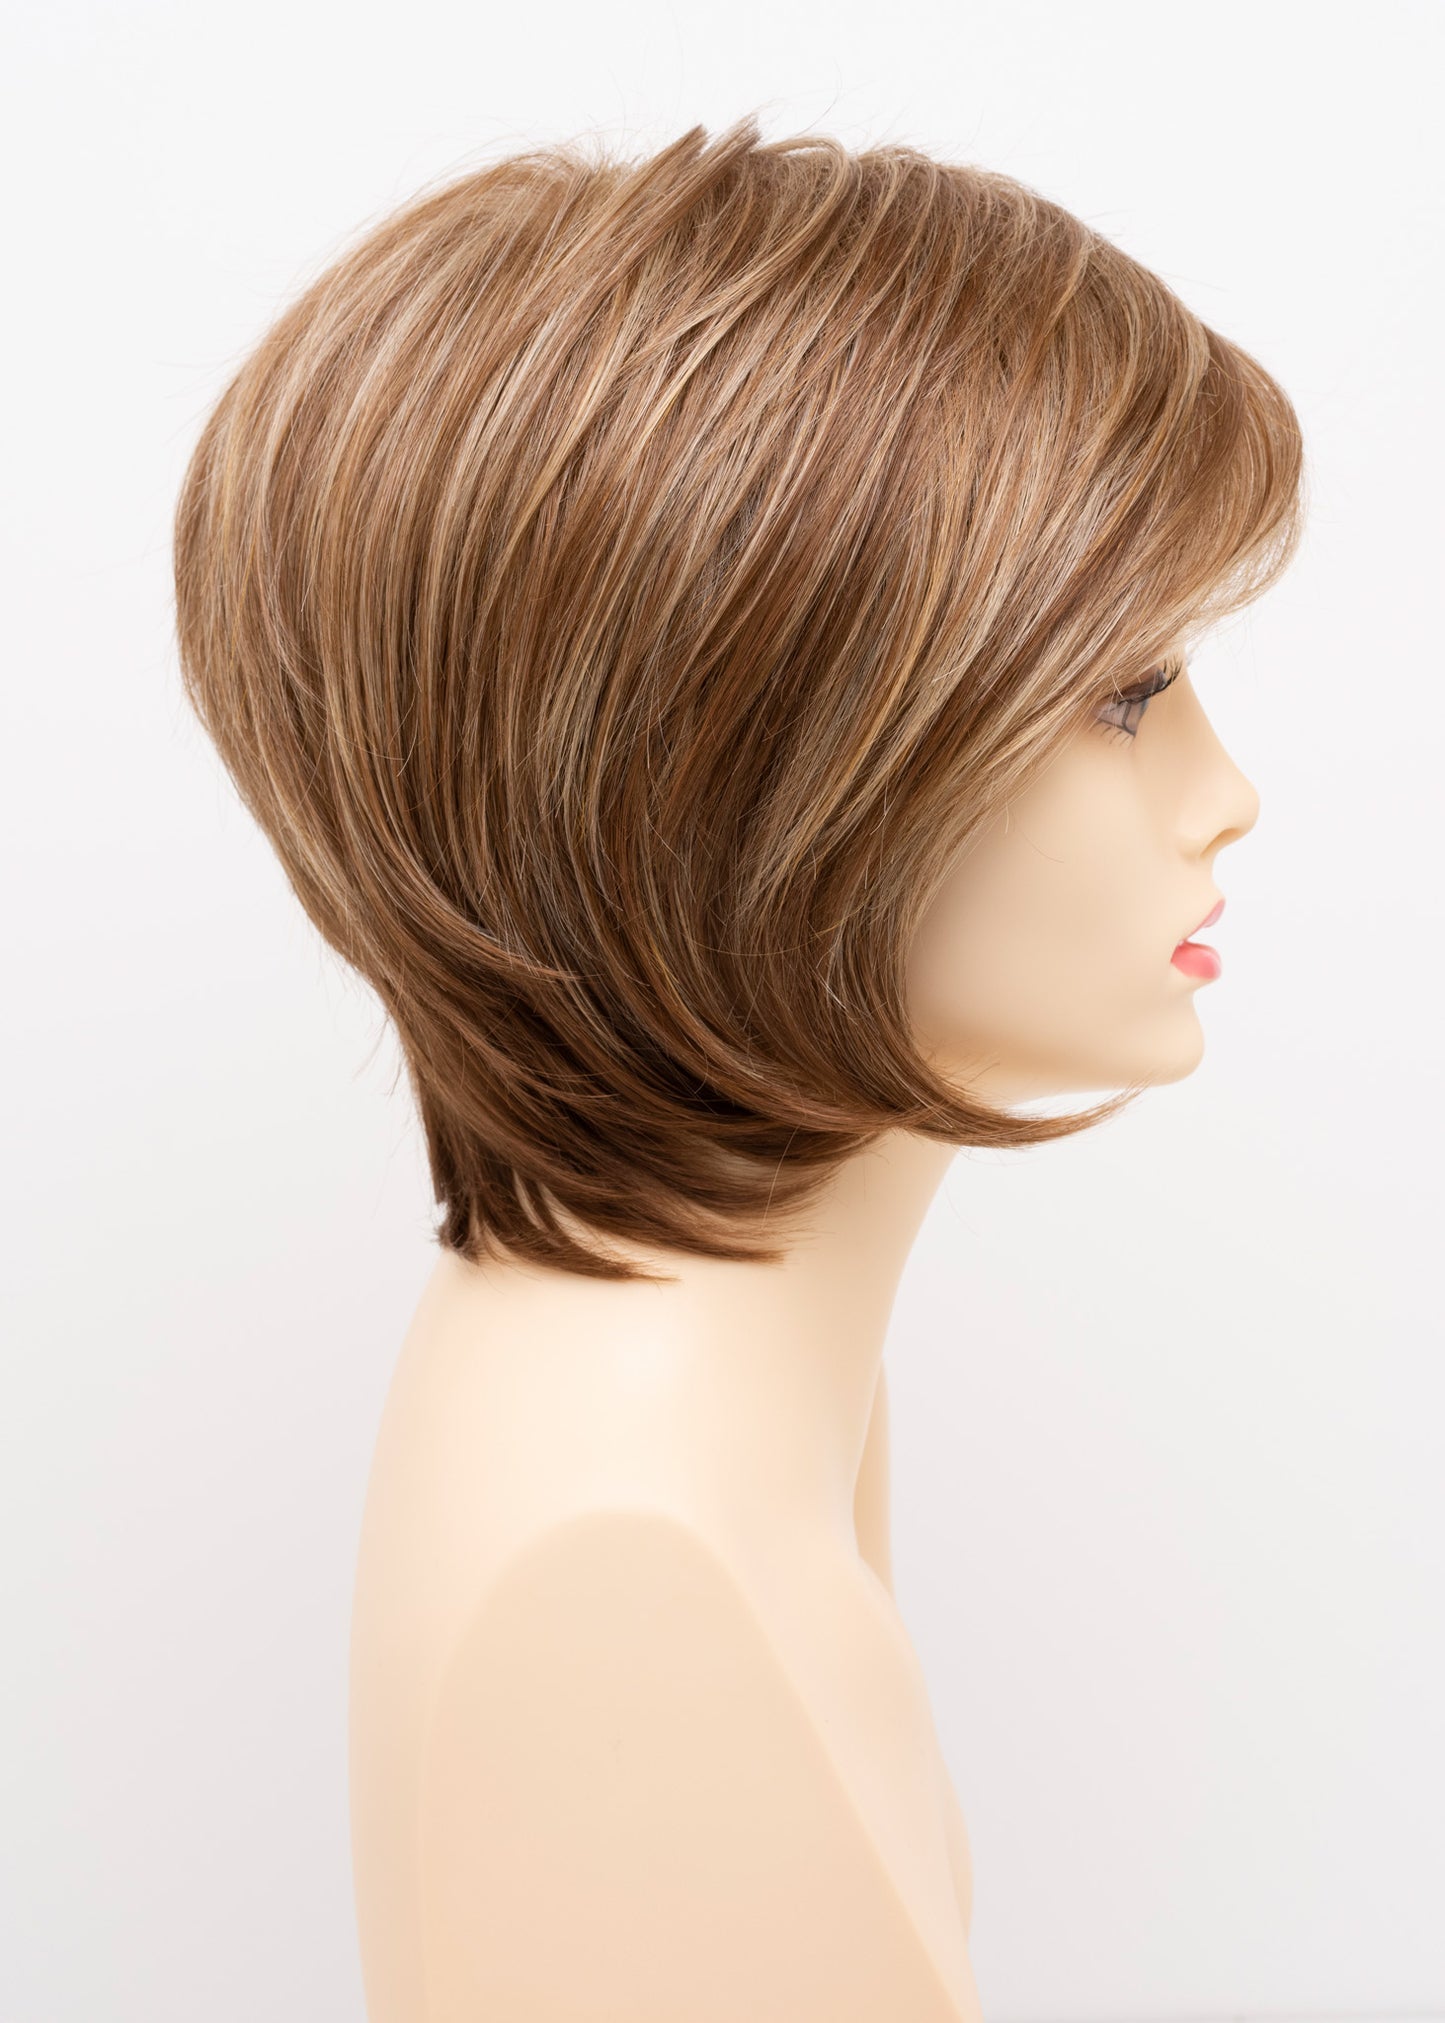 Whitney - EnvyHair  Human / Synthetic Blend Wig by Envy